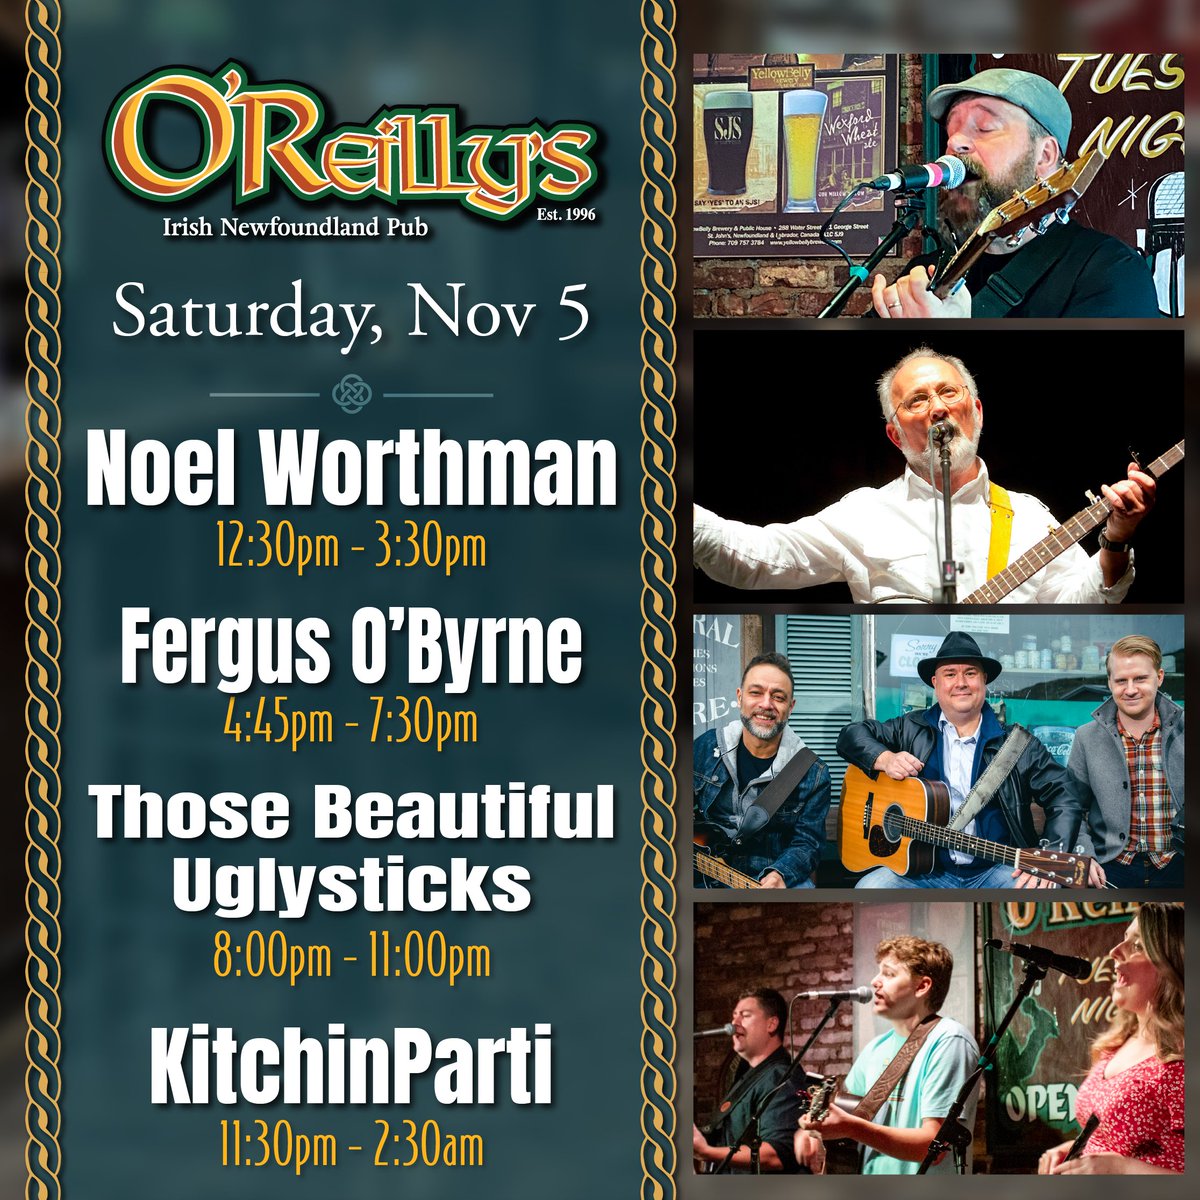 Today at O'Reilly's:

Noel Worthman - 12:30pm to 3:30pm 

Fergus O'Byrne - 4:45pm to 7:30pm 

Uglysticks - 8:00pm to 11:00pm 

KitchinParti - 11:30pm to 2:30am 

#livemusicnl #downtownstjohns #georgestreet #comehome2022